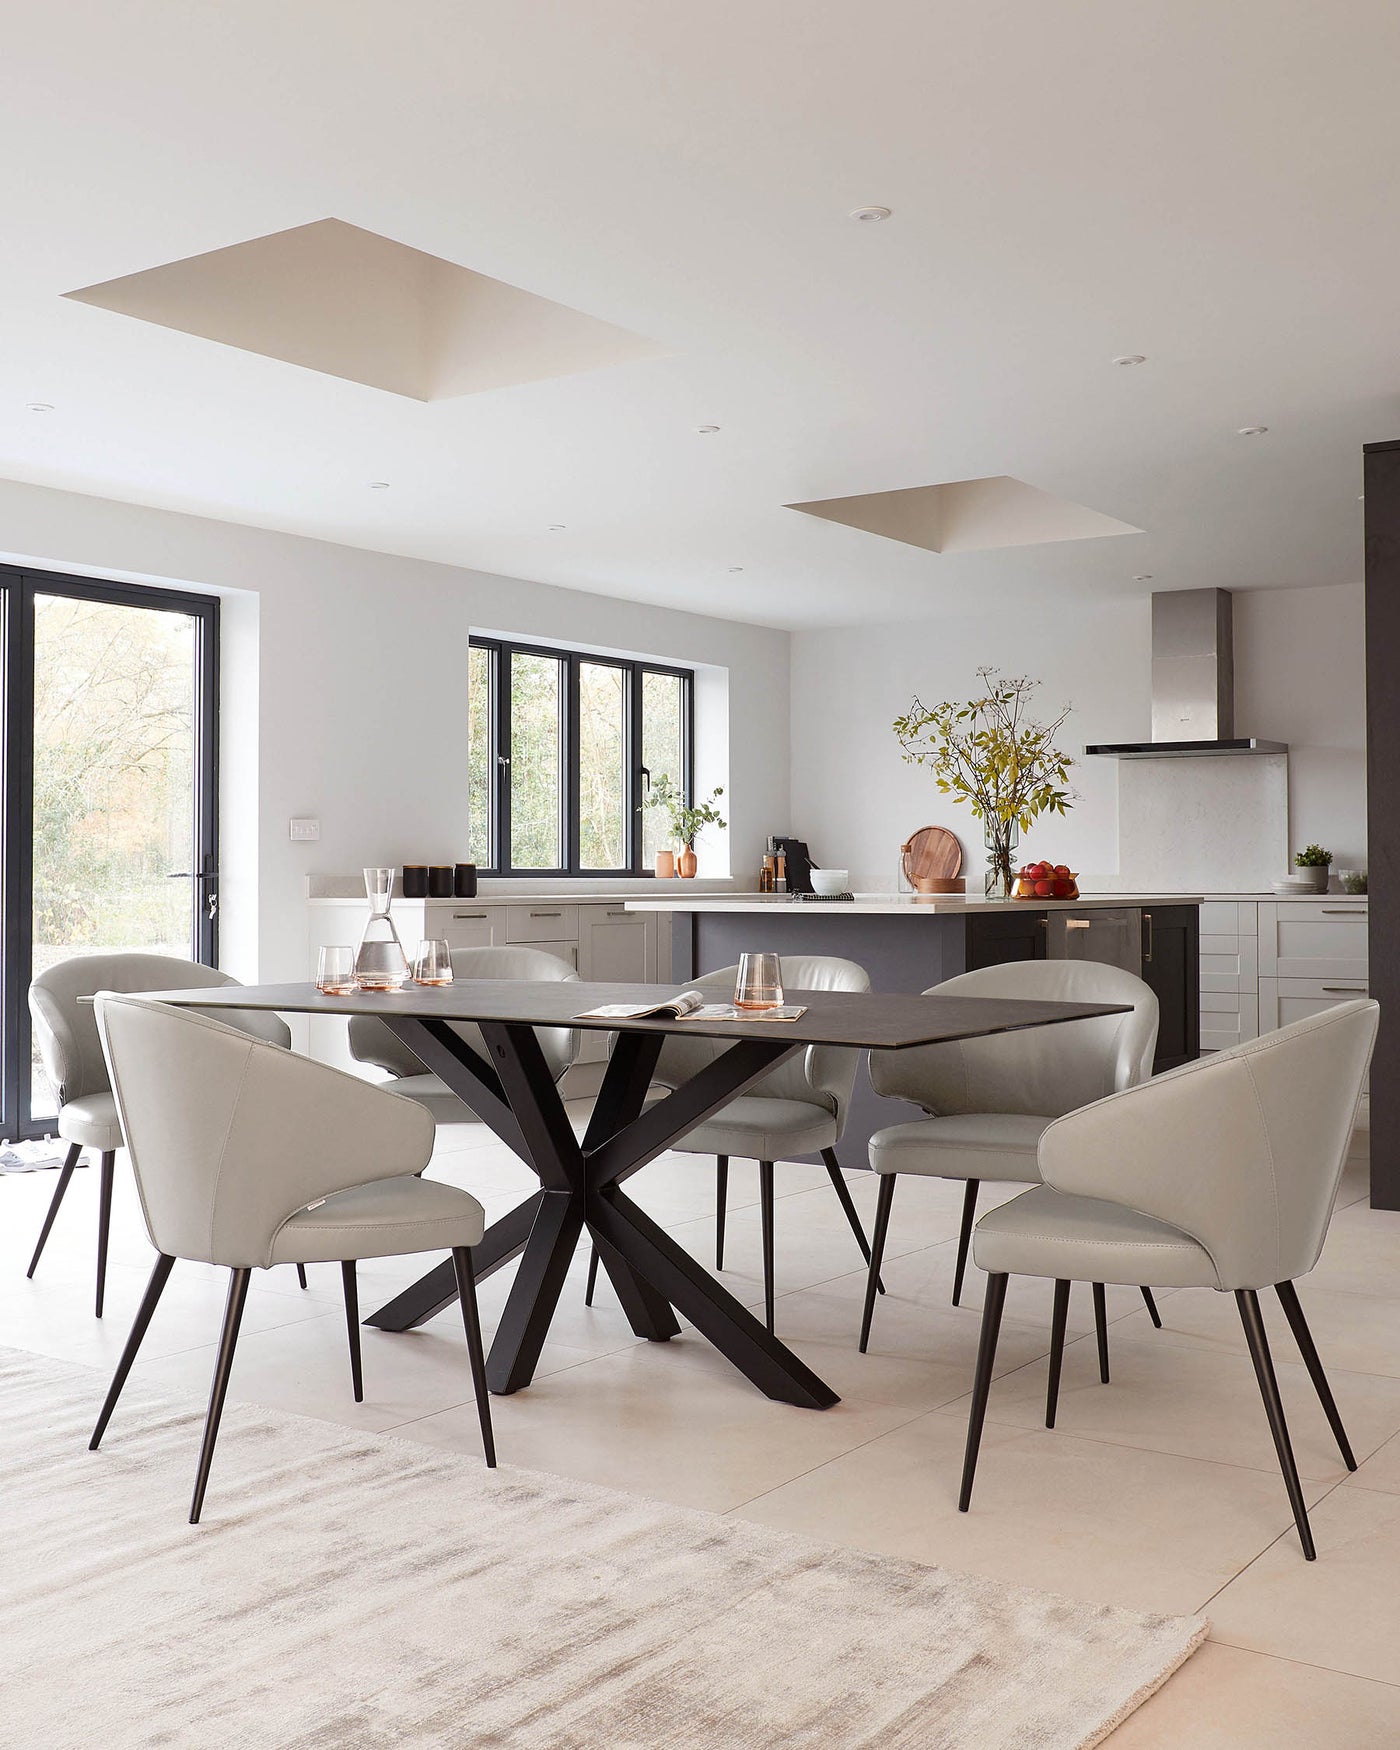 Modern dining room featuring a rectangular table with a unique, geometric black base and a smooth, dark tabletop. Surrounding the table are six elegant, upholstered chairs in light grey with slender black legs, designed for comfort and style. The setup is placed on a textured beige area rug, complementing the minimalist aesthetic of the room.